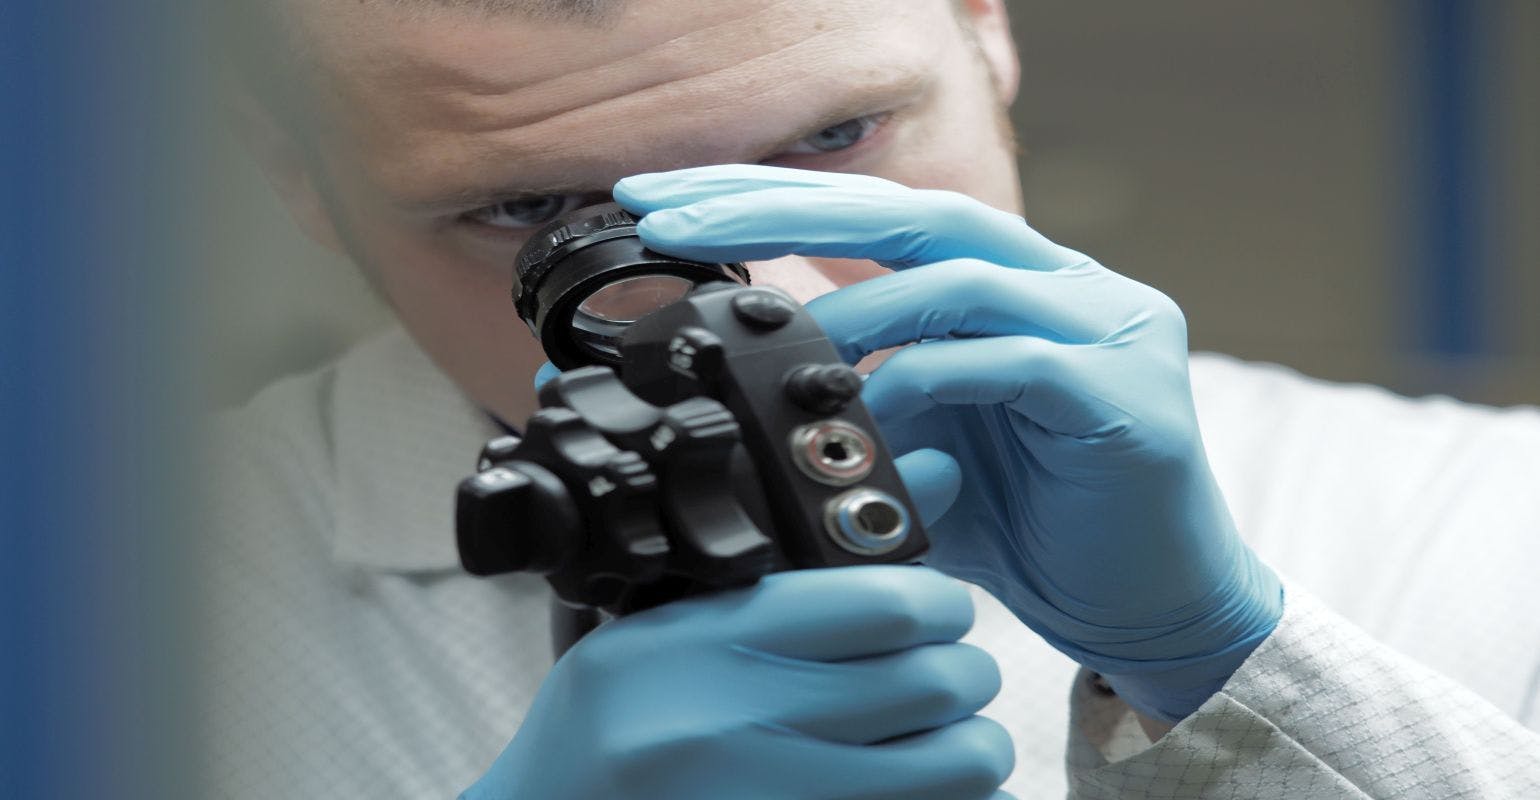 Safeguard Your Scopes: Tips to Minimize Scope Repairs and Maintain Reprocessing Validation